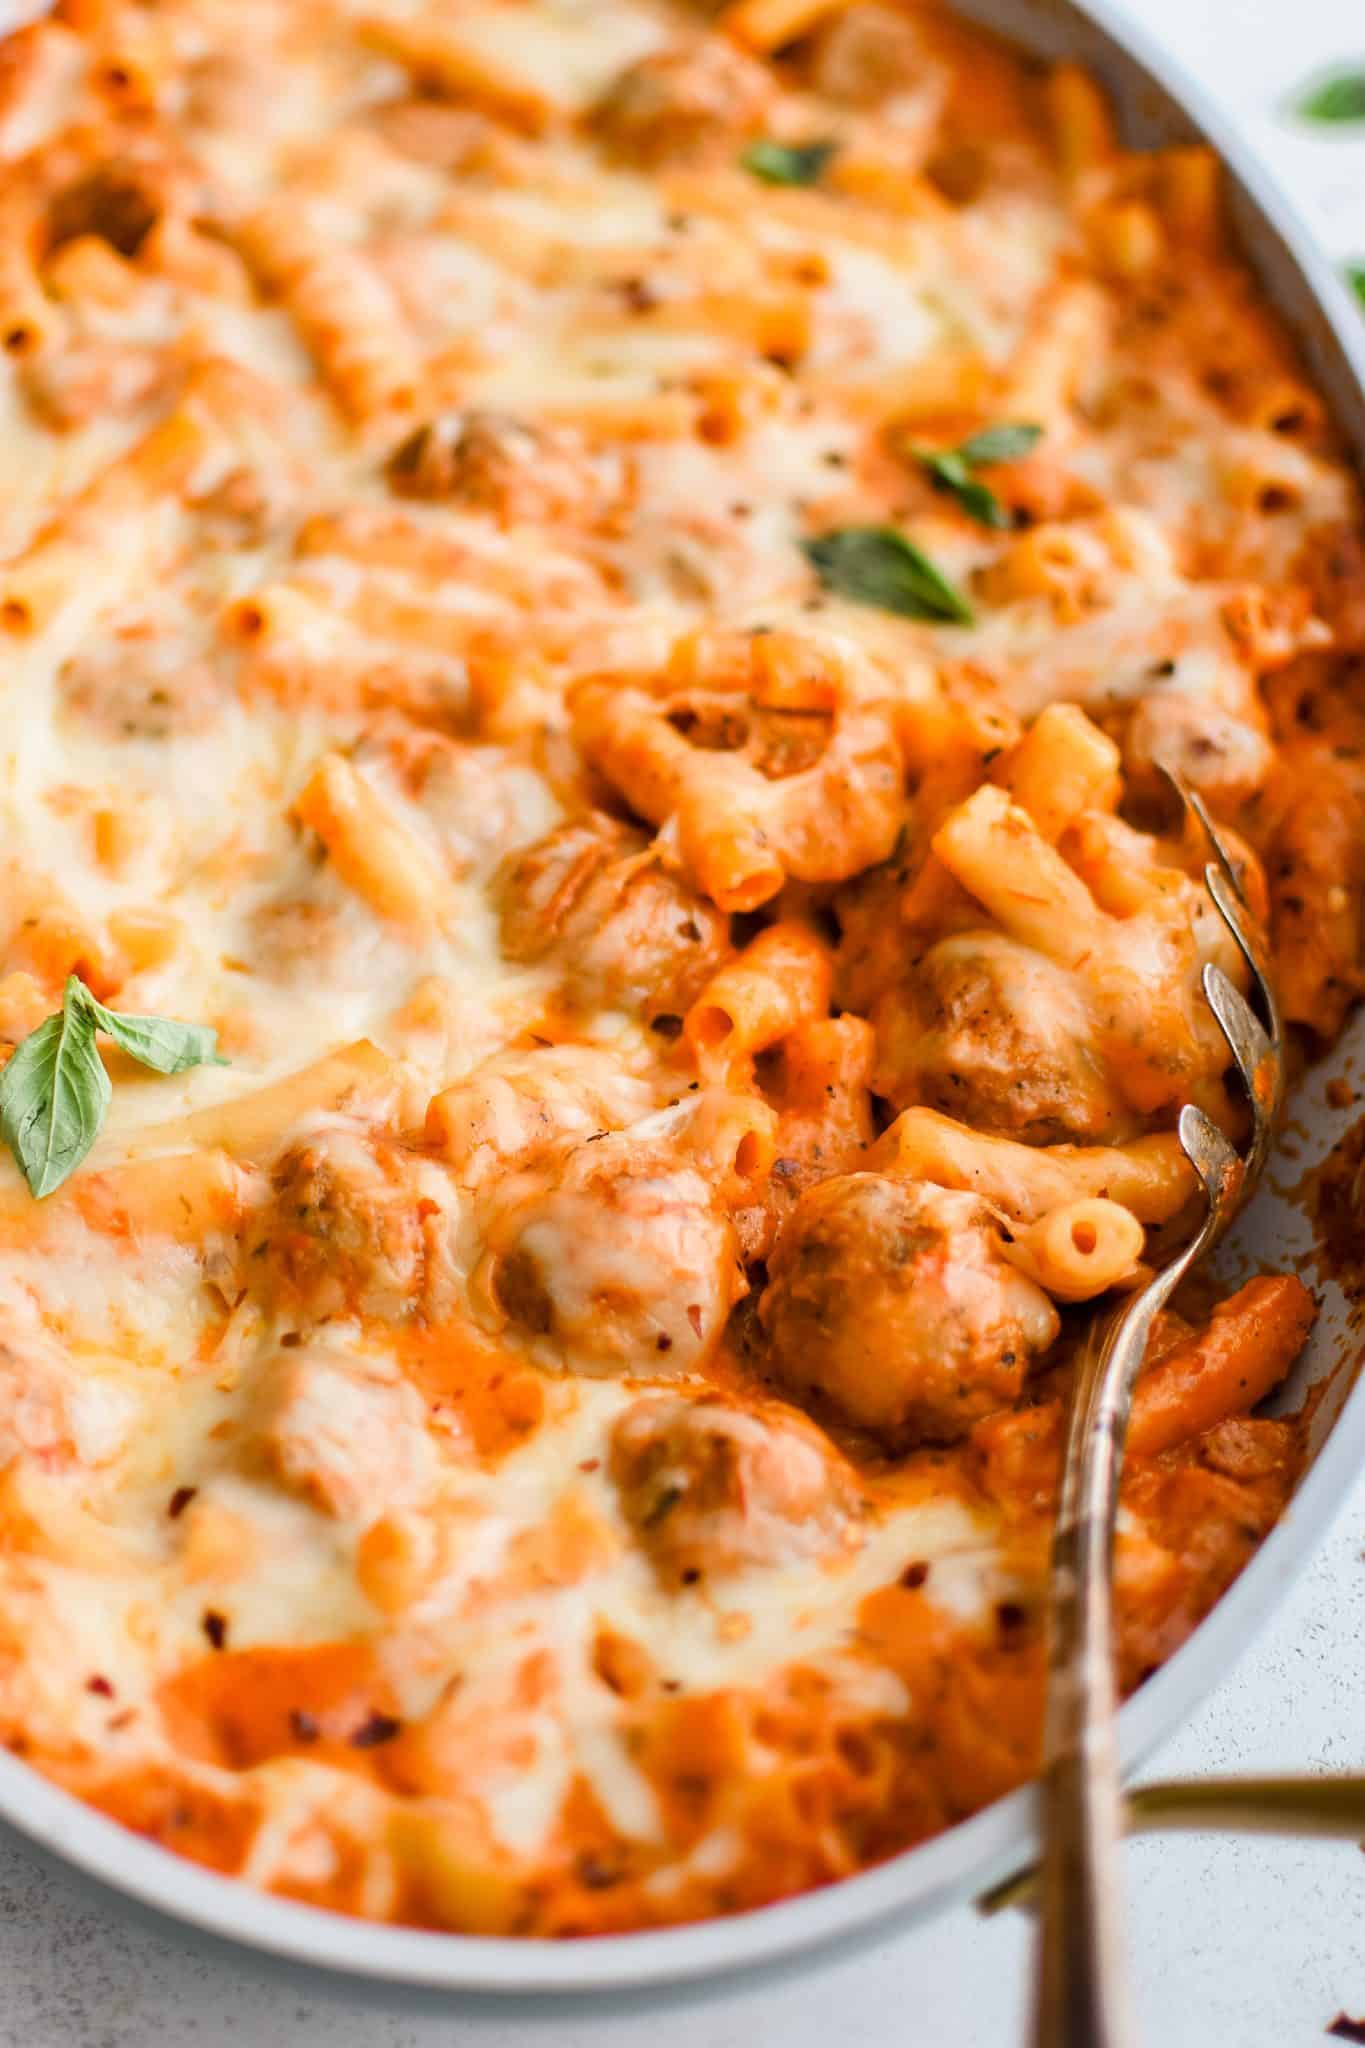 Look inside a large oval-shaped casserole pan filled with thawed meatballs and pasta cooked in a creamy, cheesy marinara sauce and topped with melted mozzarella cheese.